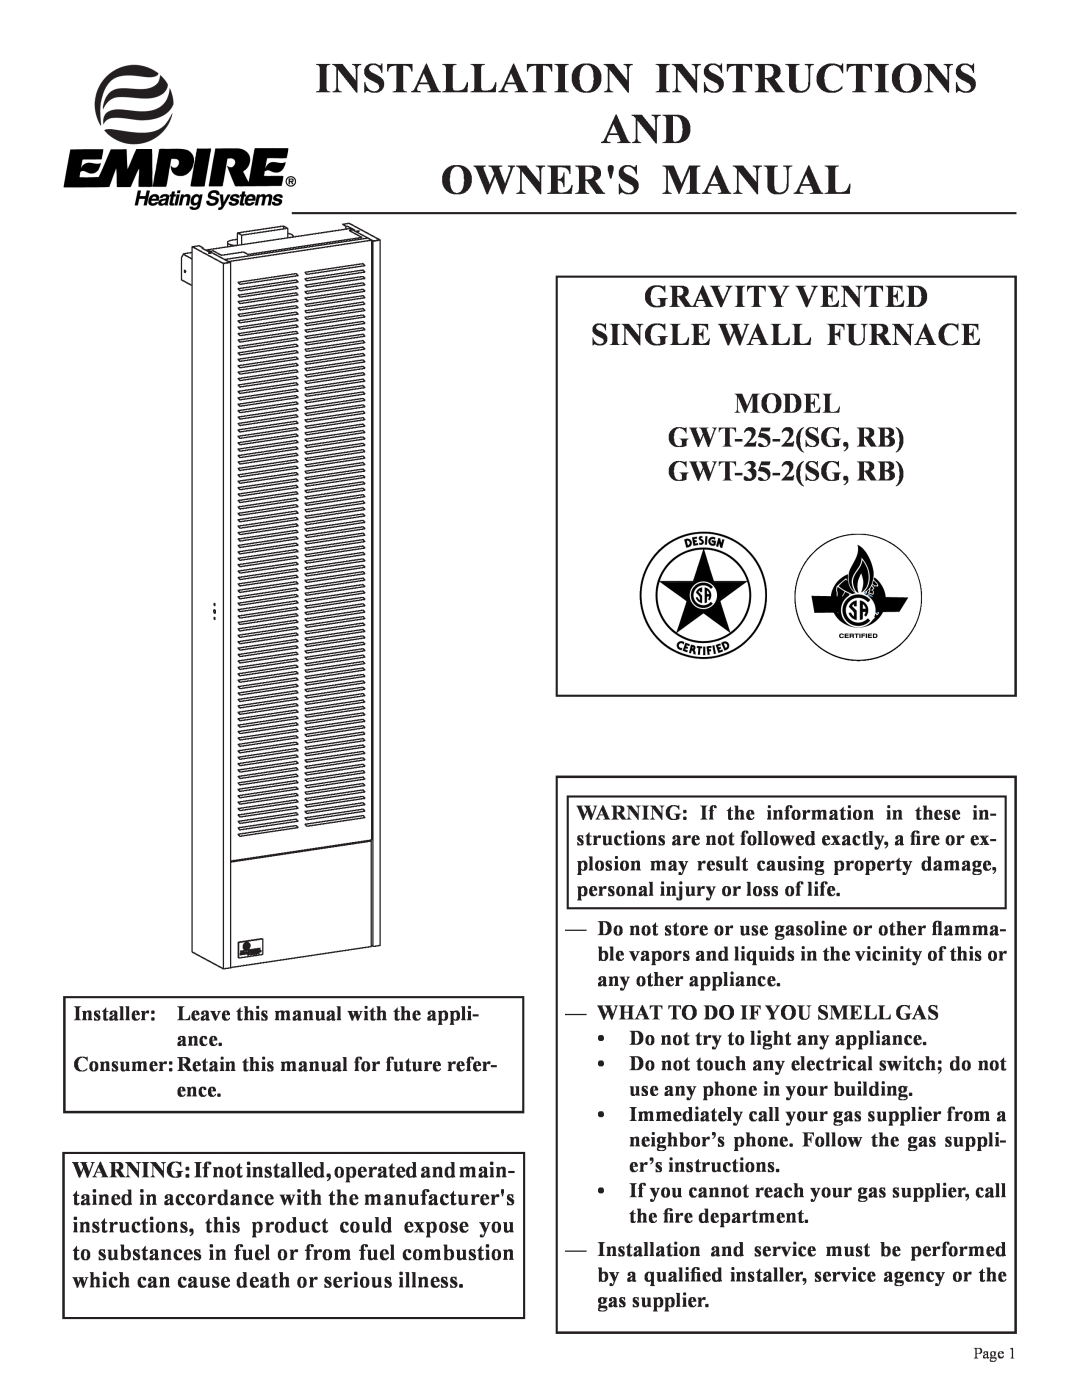 Empire Products GWT-35-2(SG, GWT-25-2(SG installation instructions Gravity Vented Single Wall Furnace 